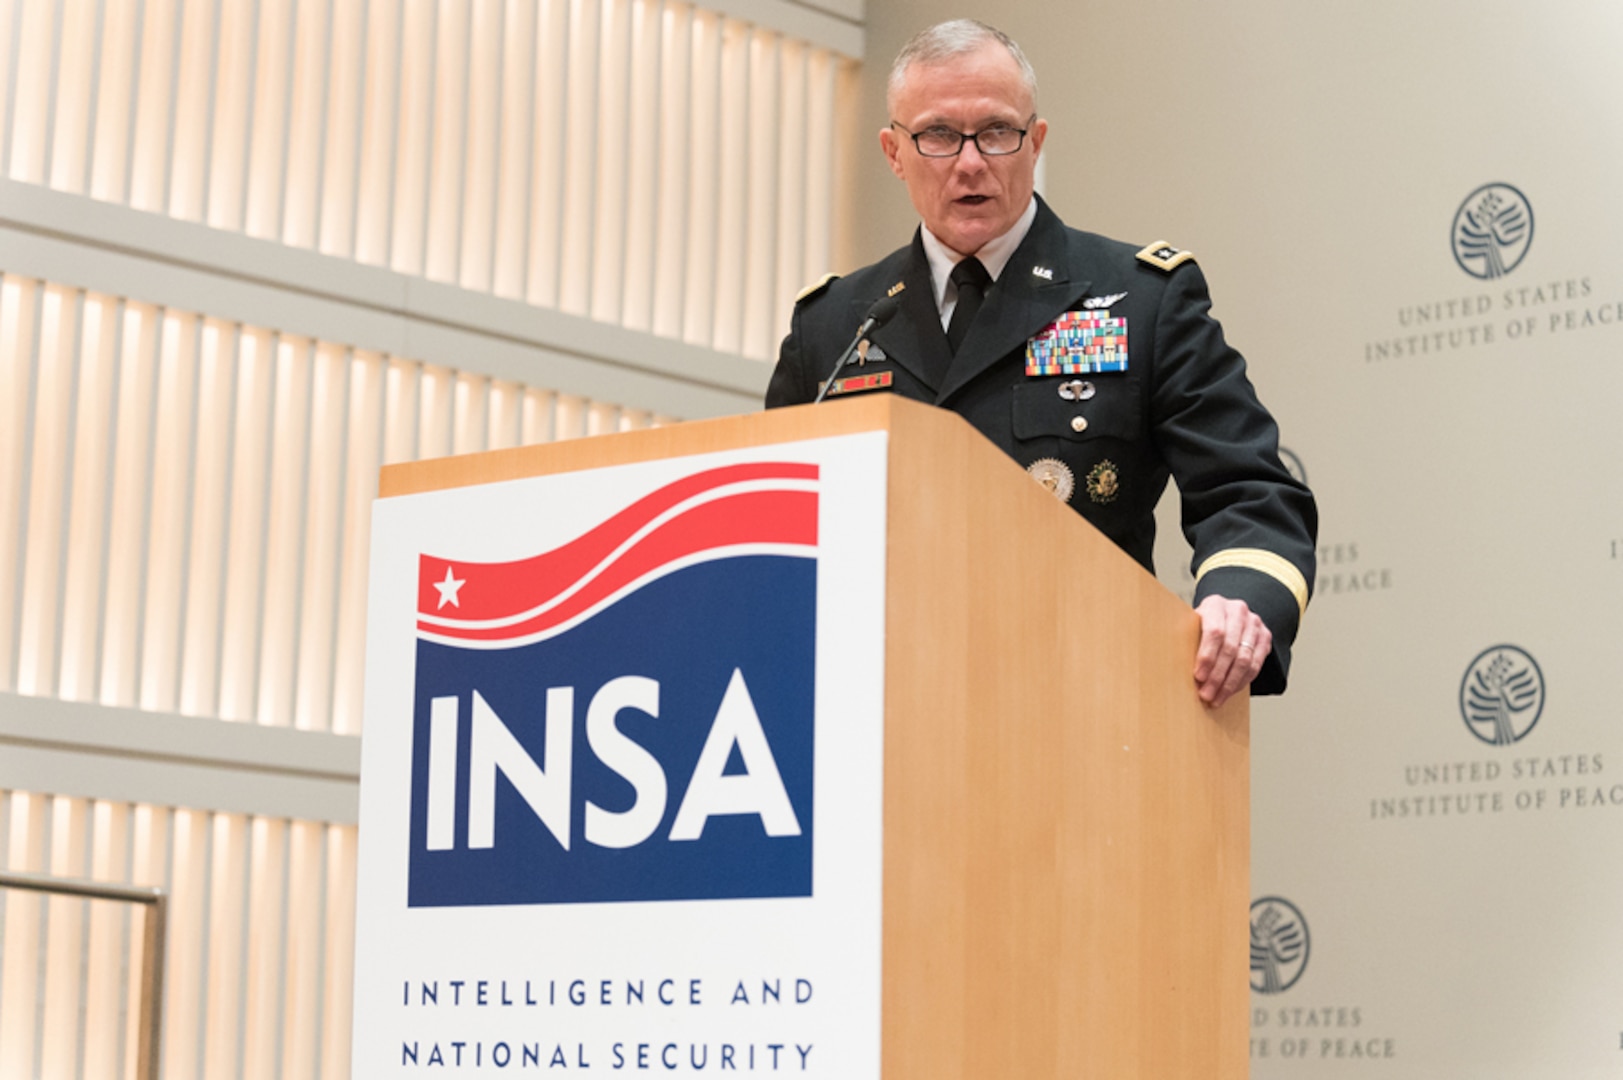 Defense Intelligence Agency Director Lt. Gen. Robert Ashley, Jr. provides the keynote address during the 2019 Intelligence and National Security Alliance Achievement Awards, Feb. 21, in Washington, D.C.